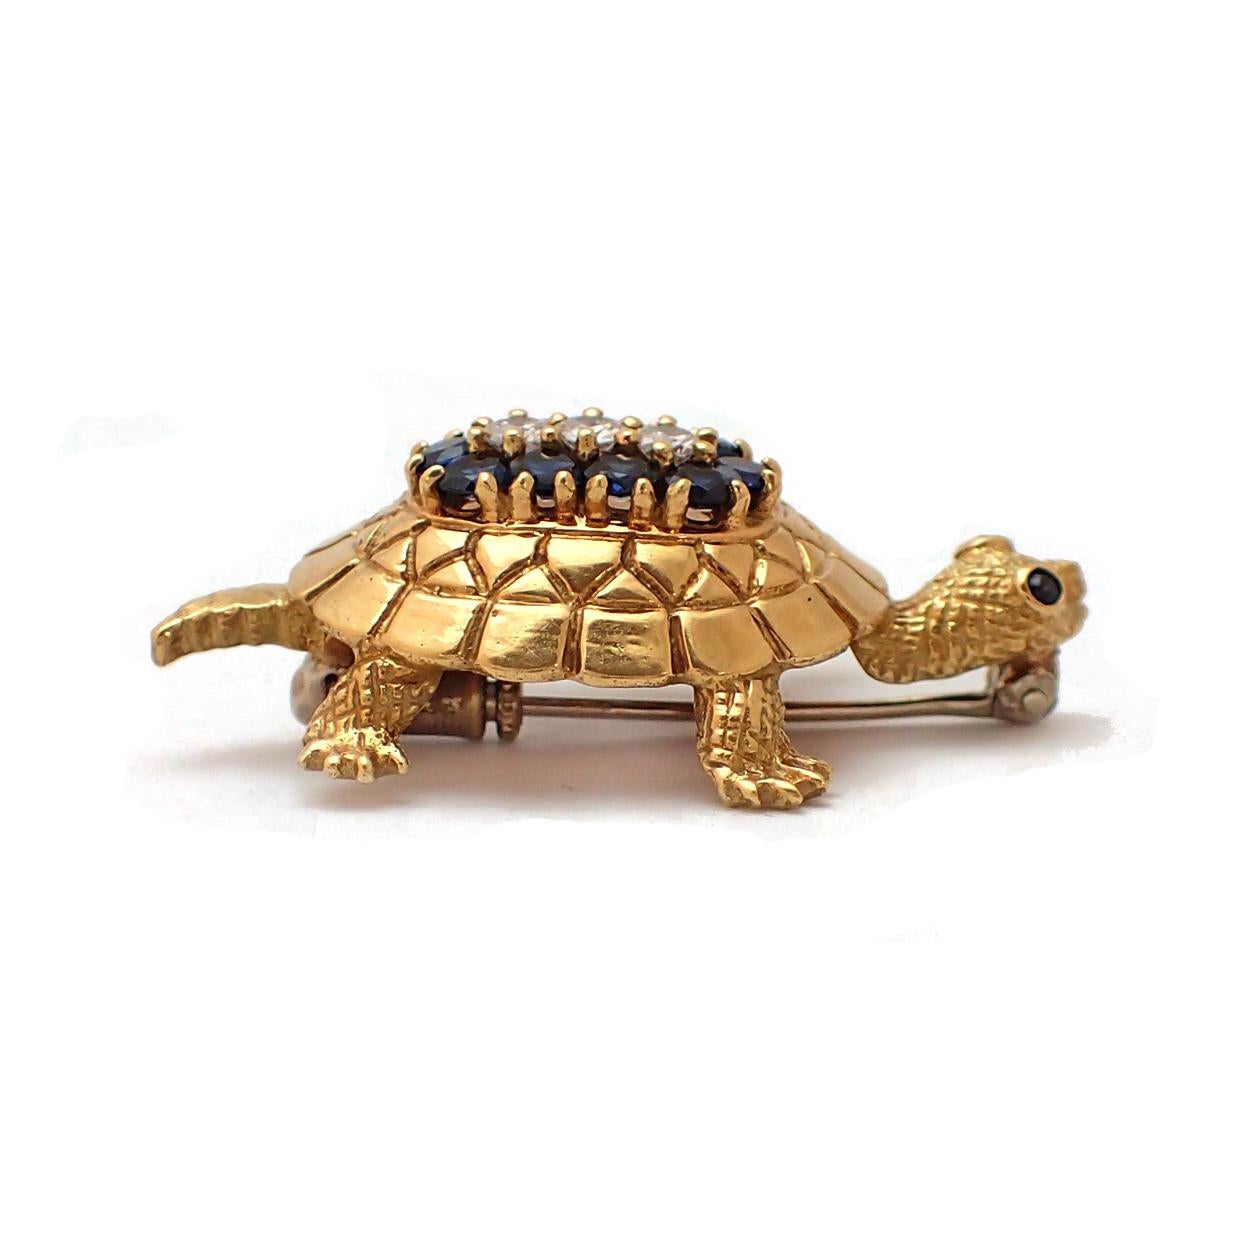 Add to your menagerie with this elegant turtle brooch. Consisting of about one carat of deep blue sapphires and approximately 3/4 of a carat if diamonds (G color, VS clarity), the turtle's shell has some great details. Additional sapphires are used